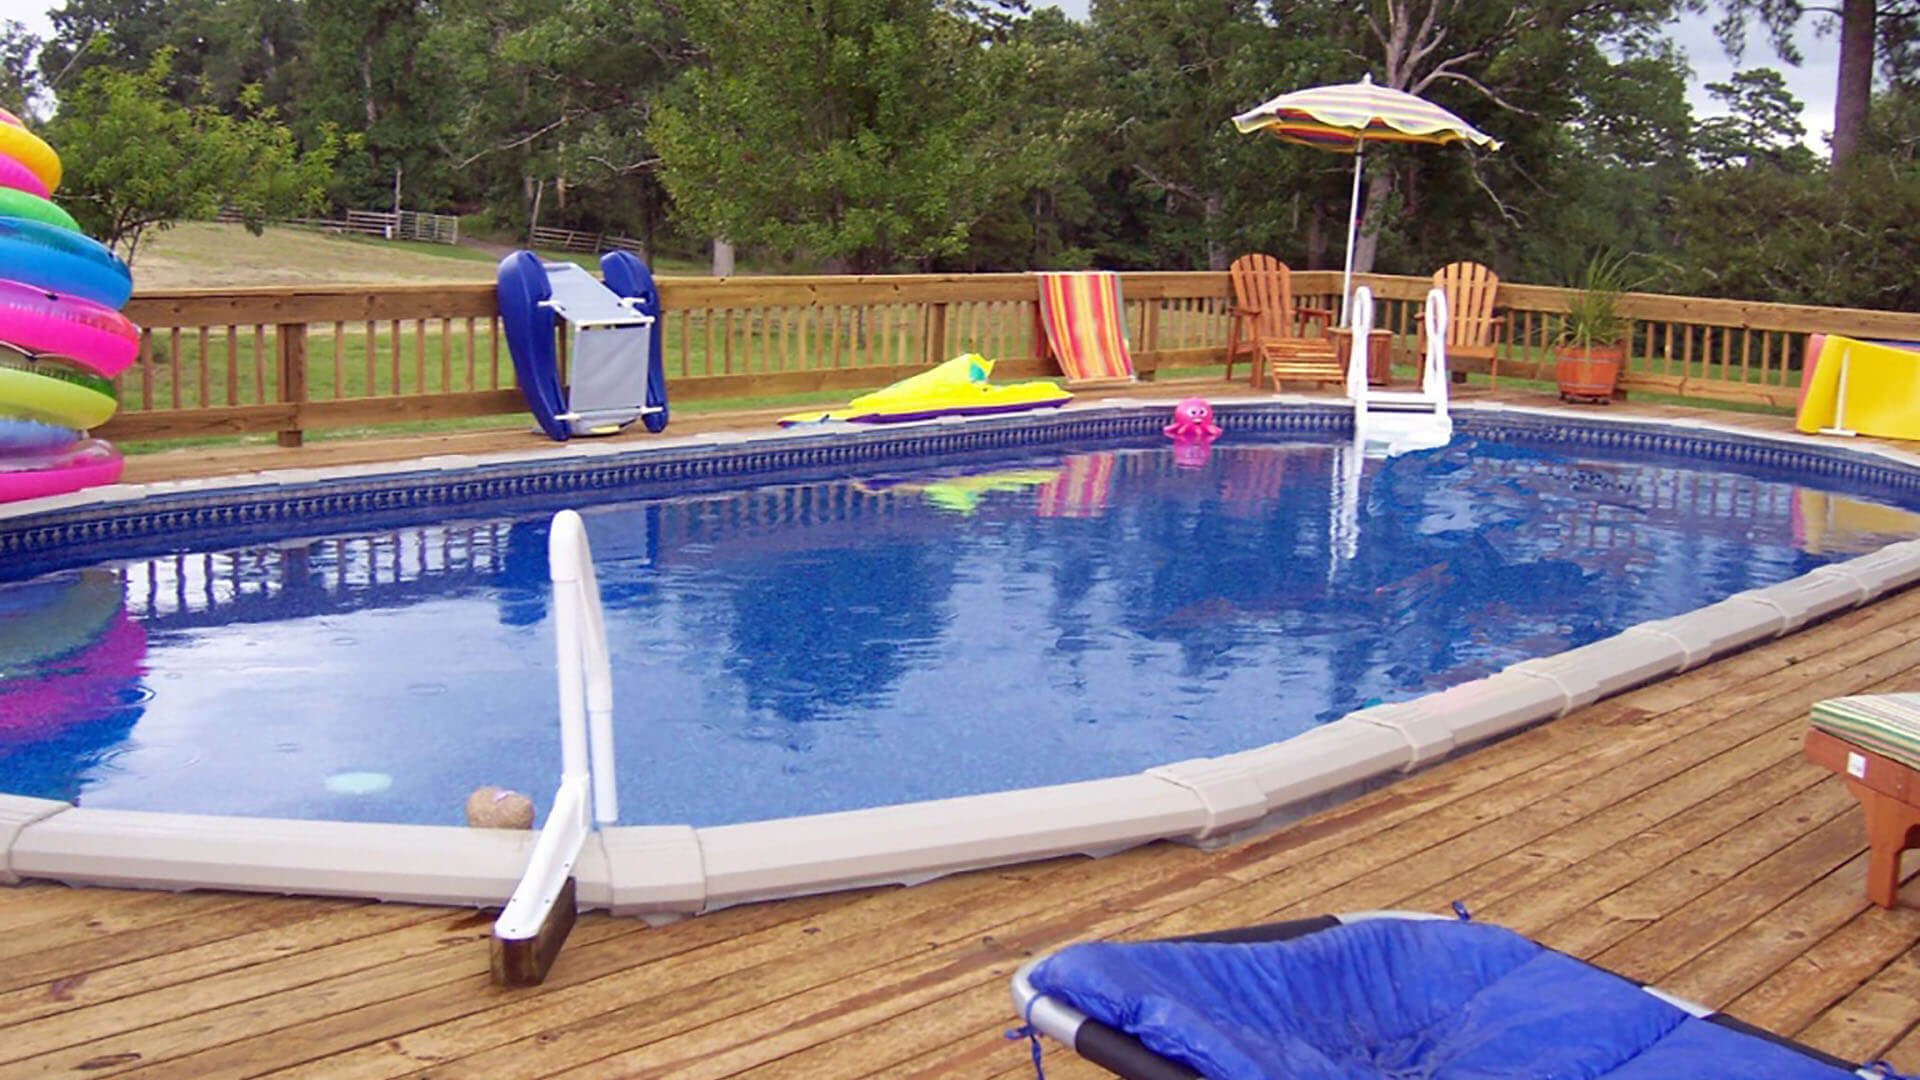 Why Buy Your Above Ground Pool From a Local Pool Dealer?